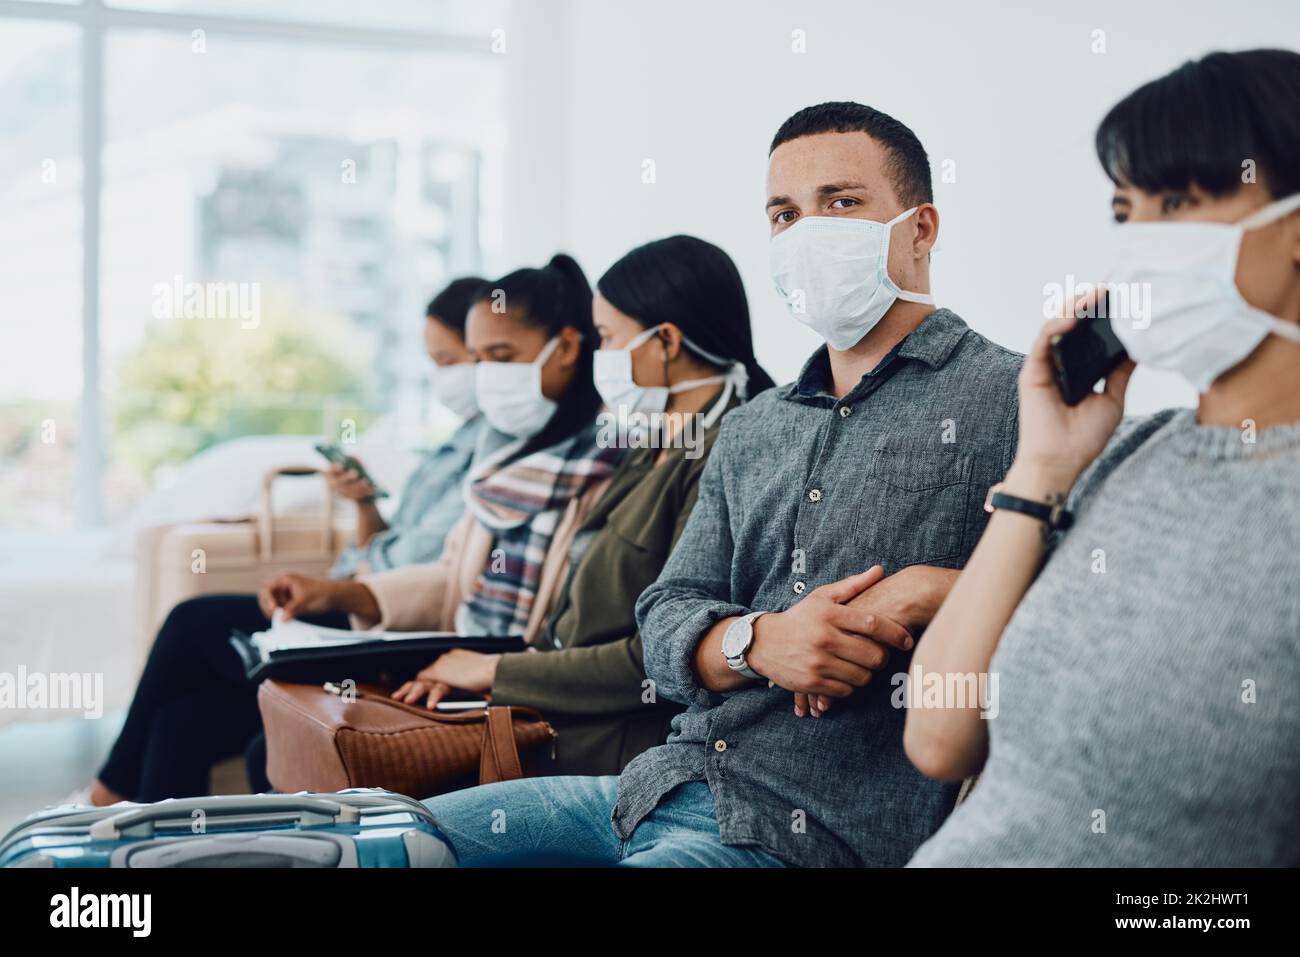 Never underestimate the importance of patience. Shot of a group of young people wearing masks in a waiting room. Stock Photo